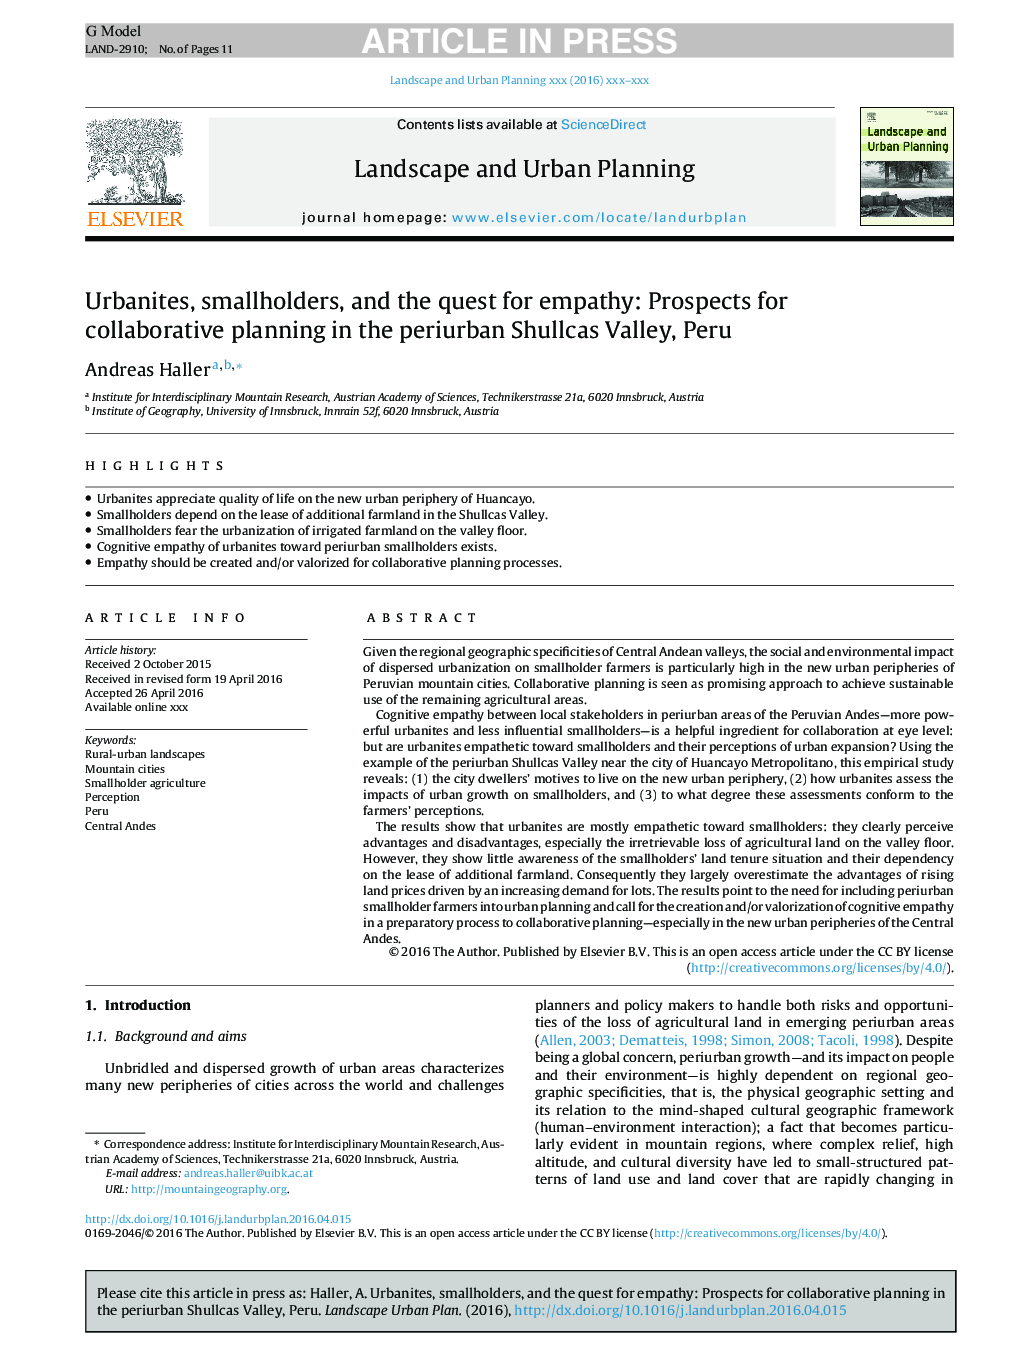 Urbanites, smallholders, and the quest for empathy: Prospects for collaborative planning in the periurban Shullcas Valley, Peru